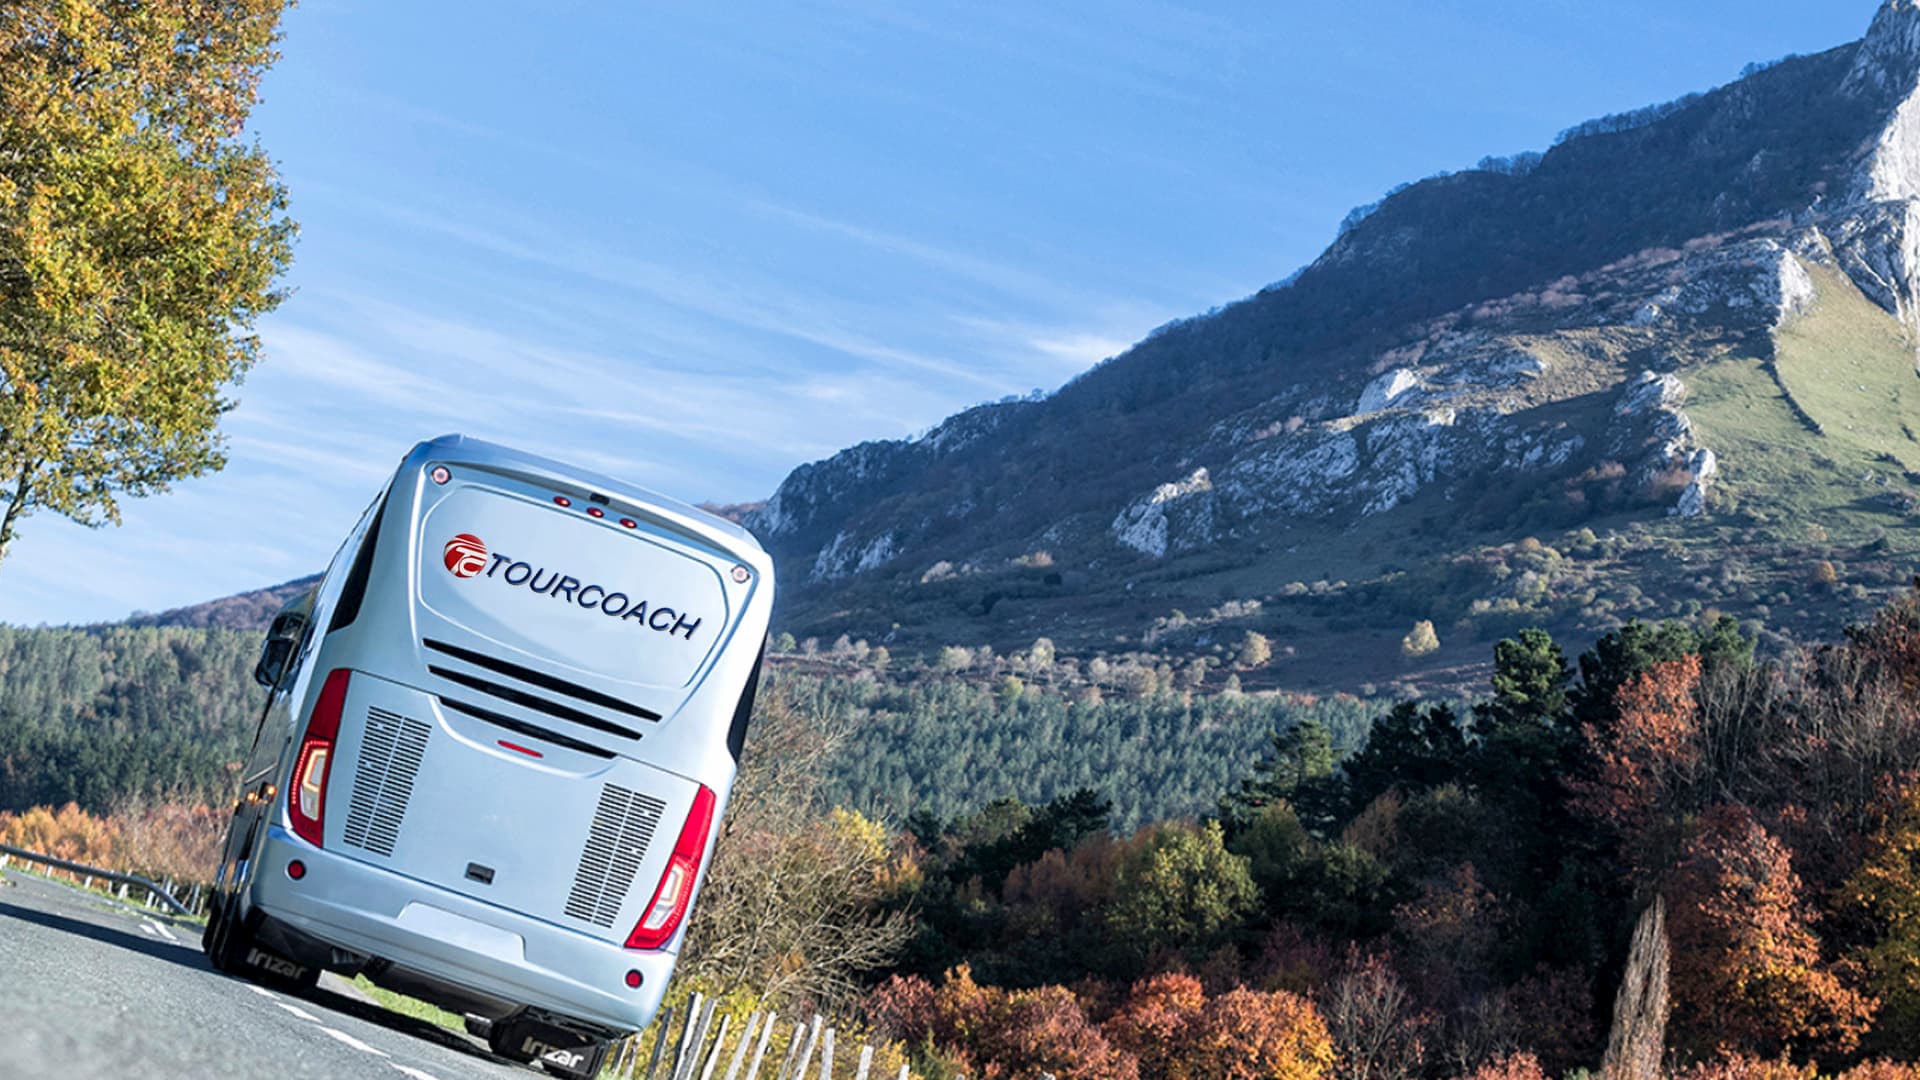 Traveling TourCoach bus by mountain